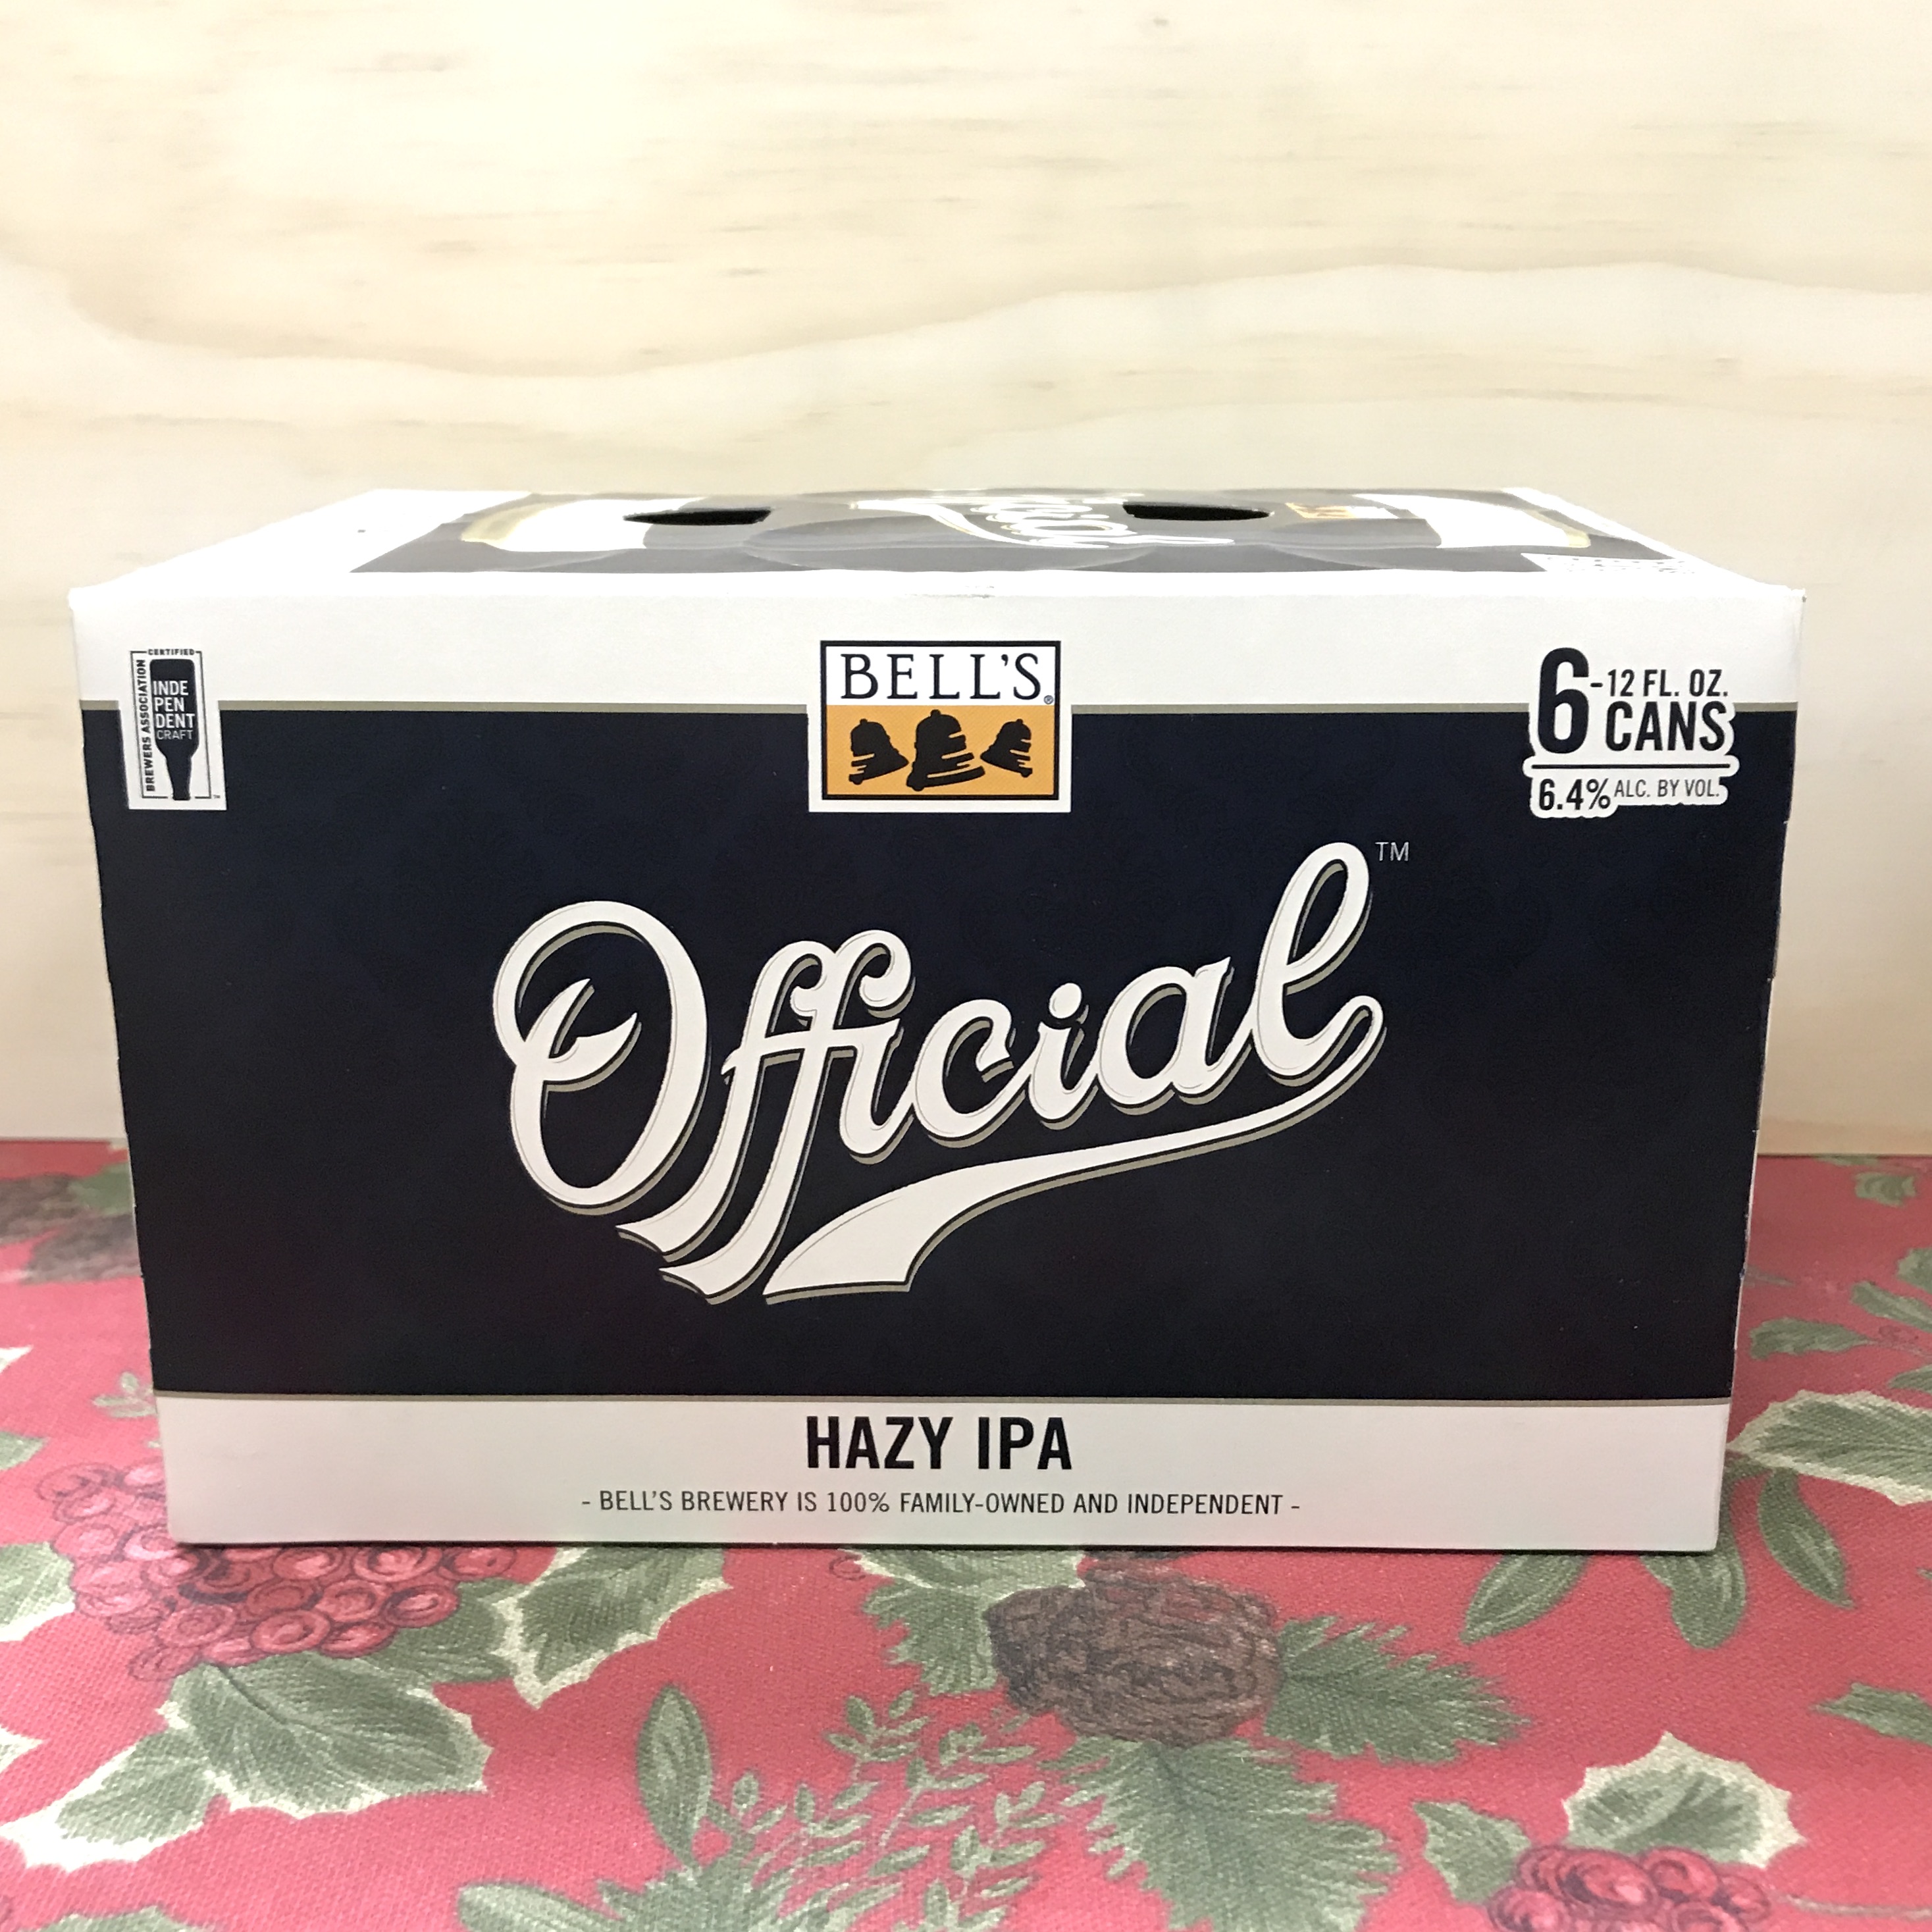 Bell's Official Hazy IPA 6 x 12oz cans